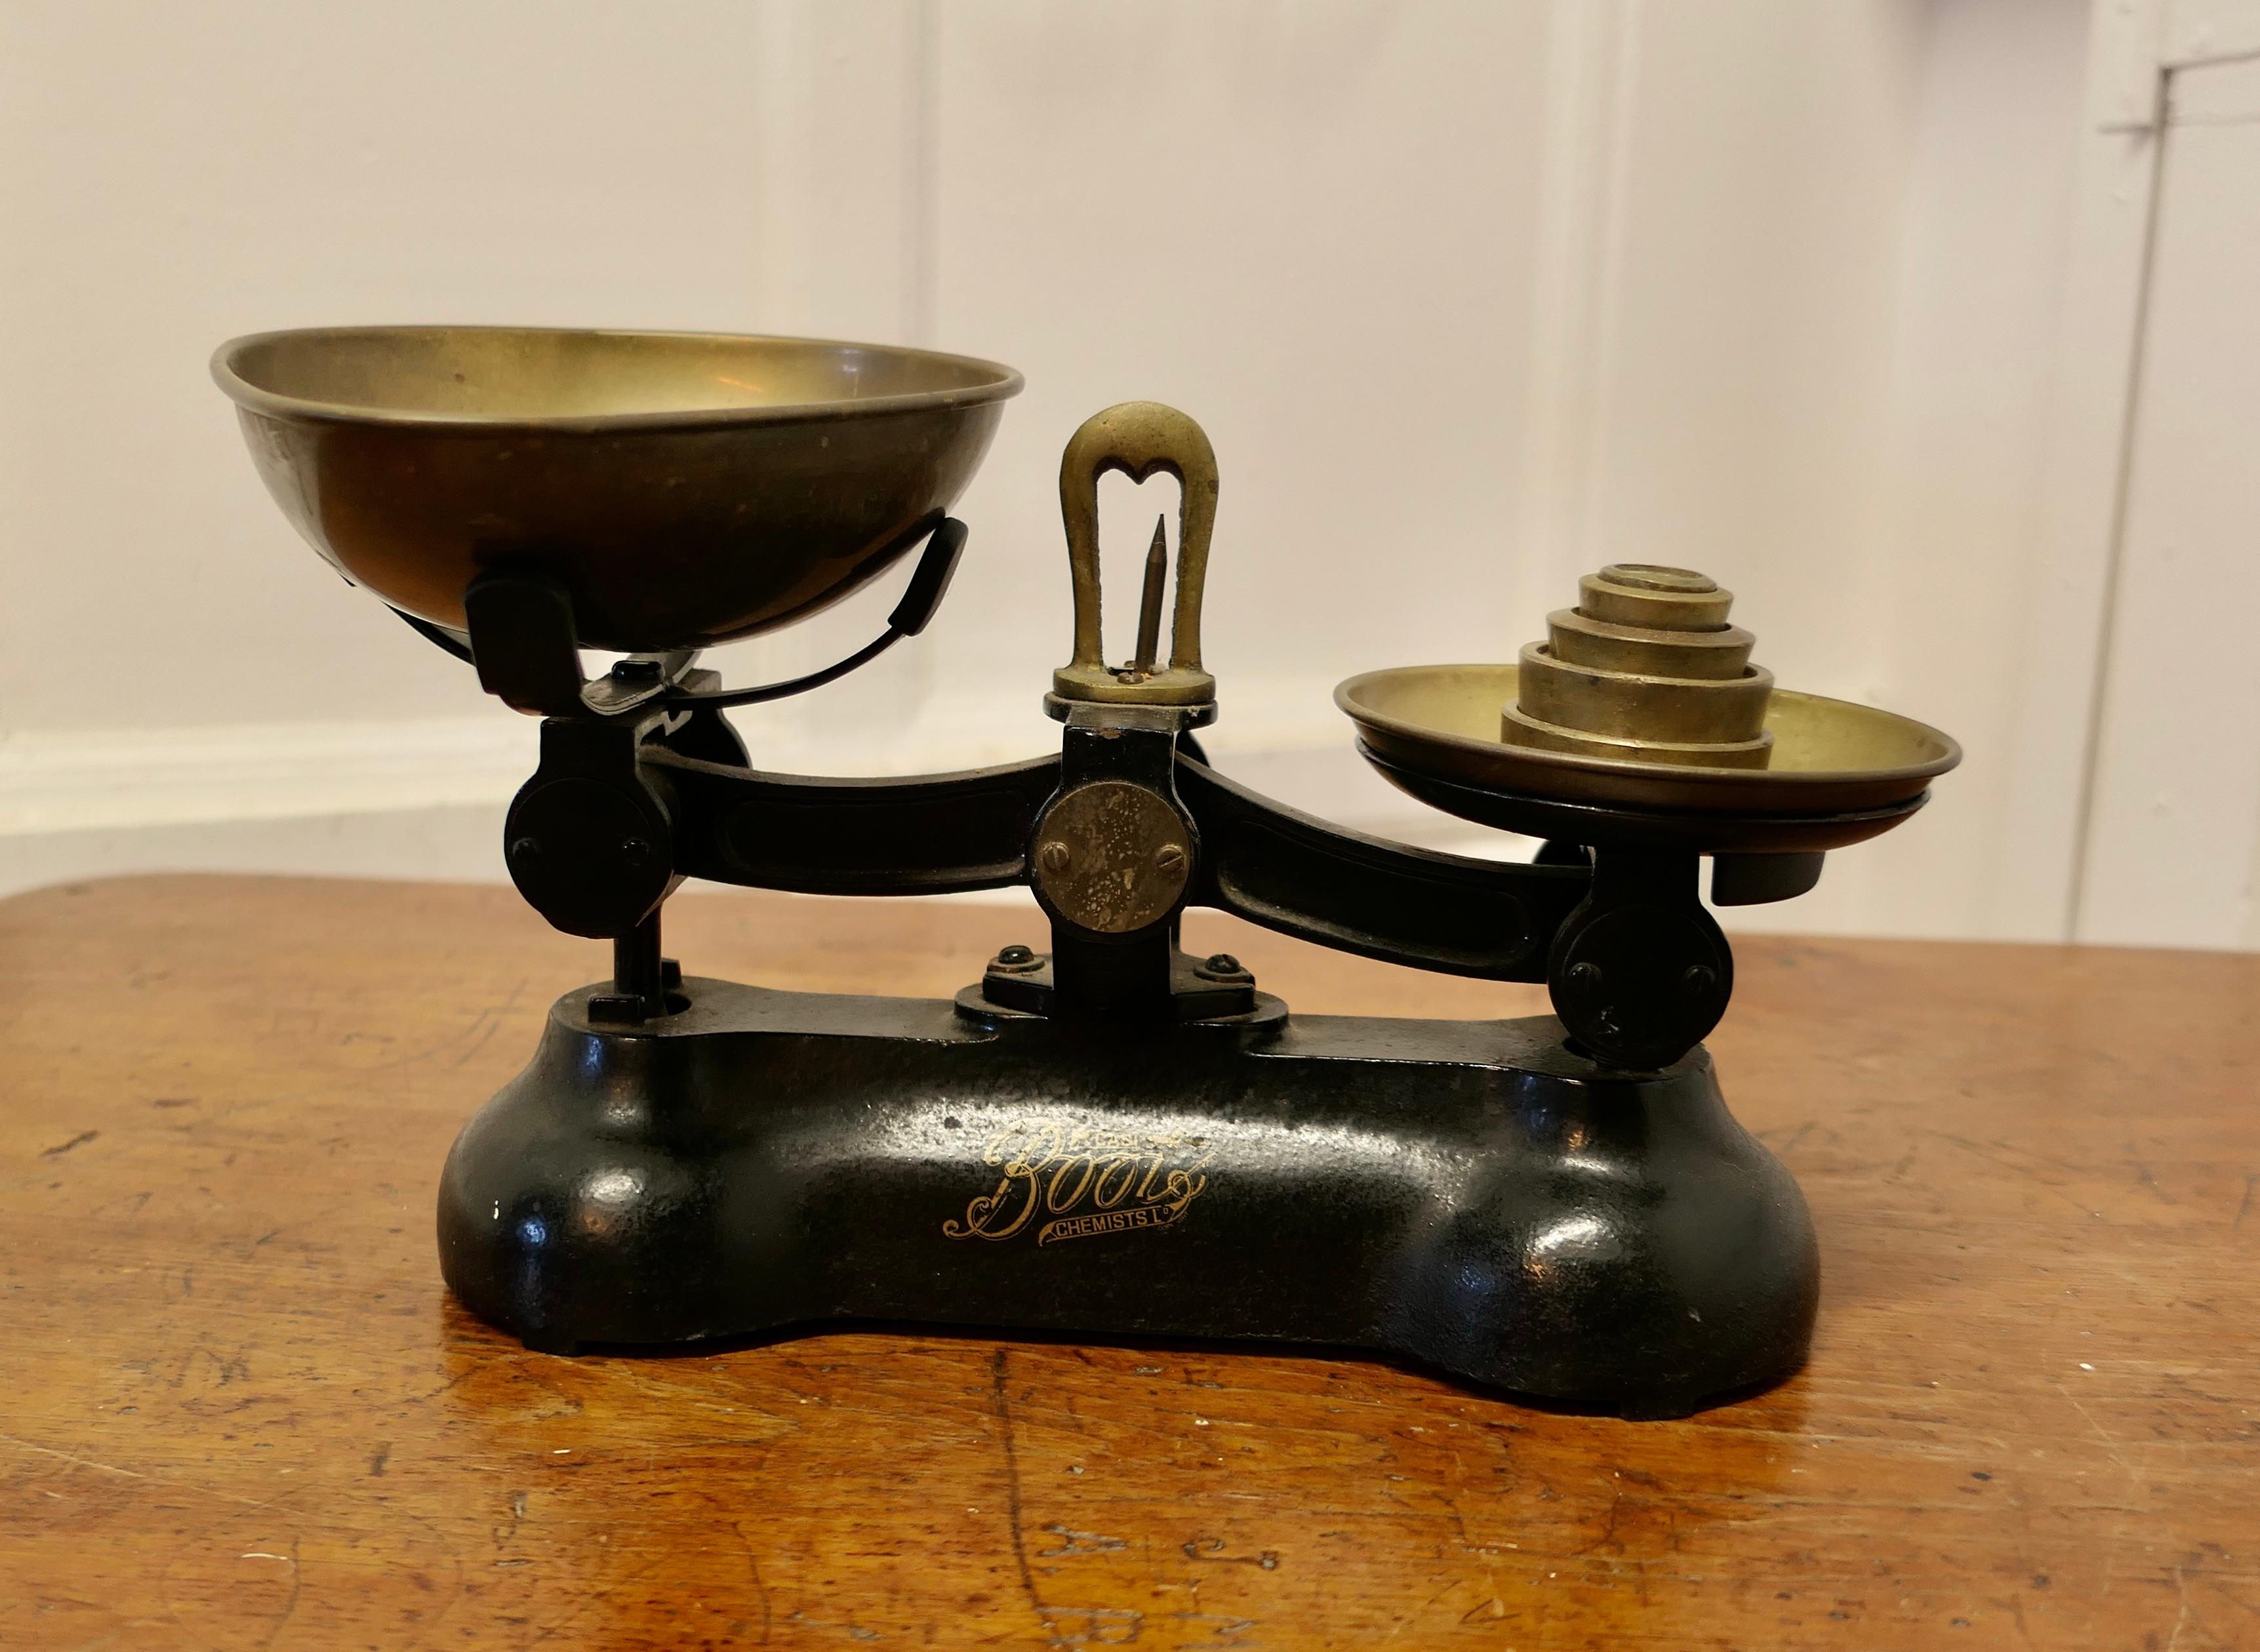 Victorian Kitchen Balance Scales, from Boots with Weights

The scale is in Cast iron with a removable brass scoop on one side
 
The scales are 8” high, 12” wide and 9” deep
TSW196
